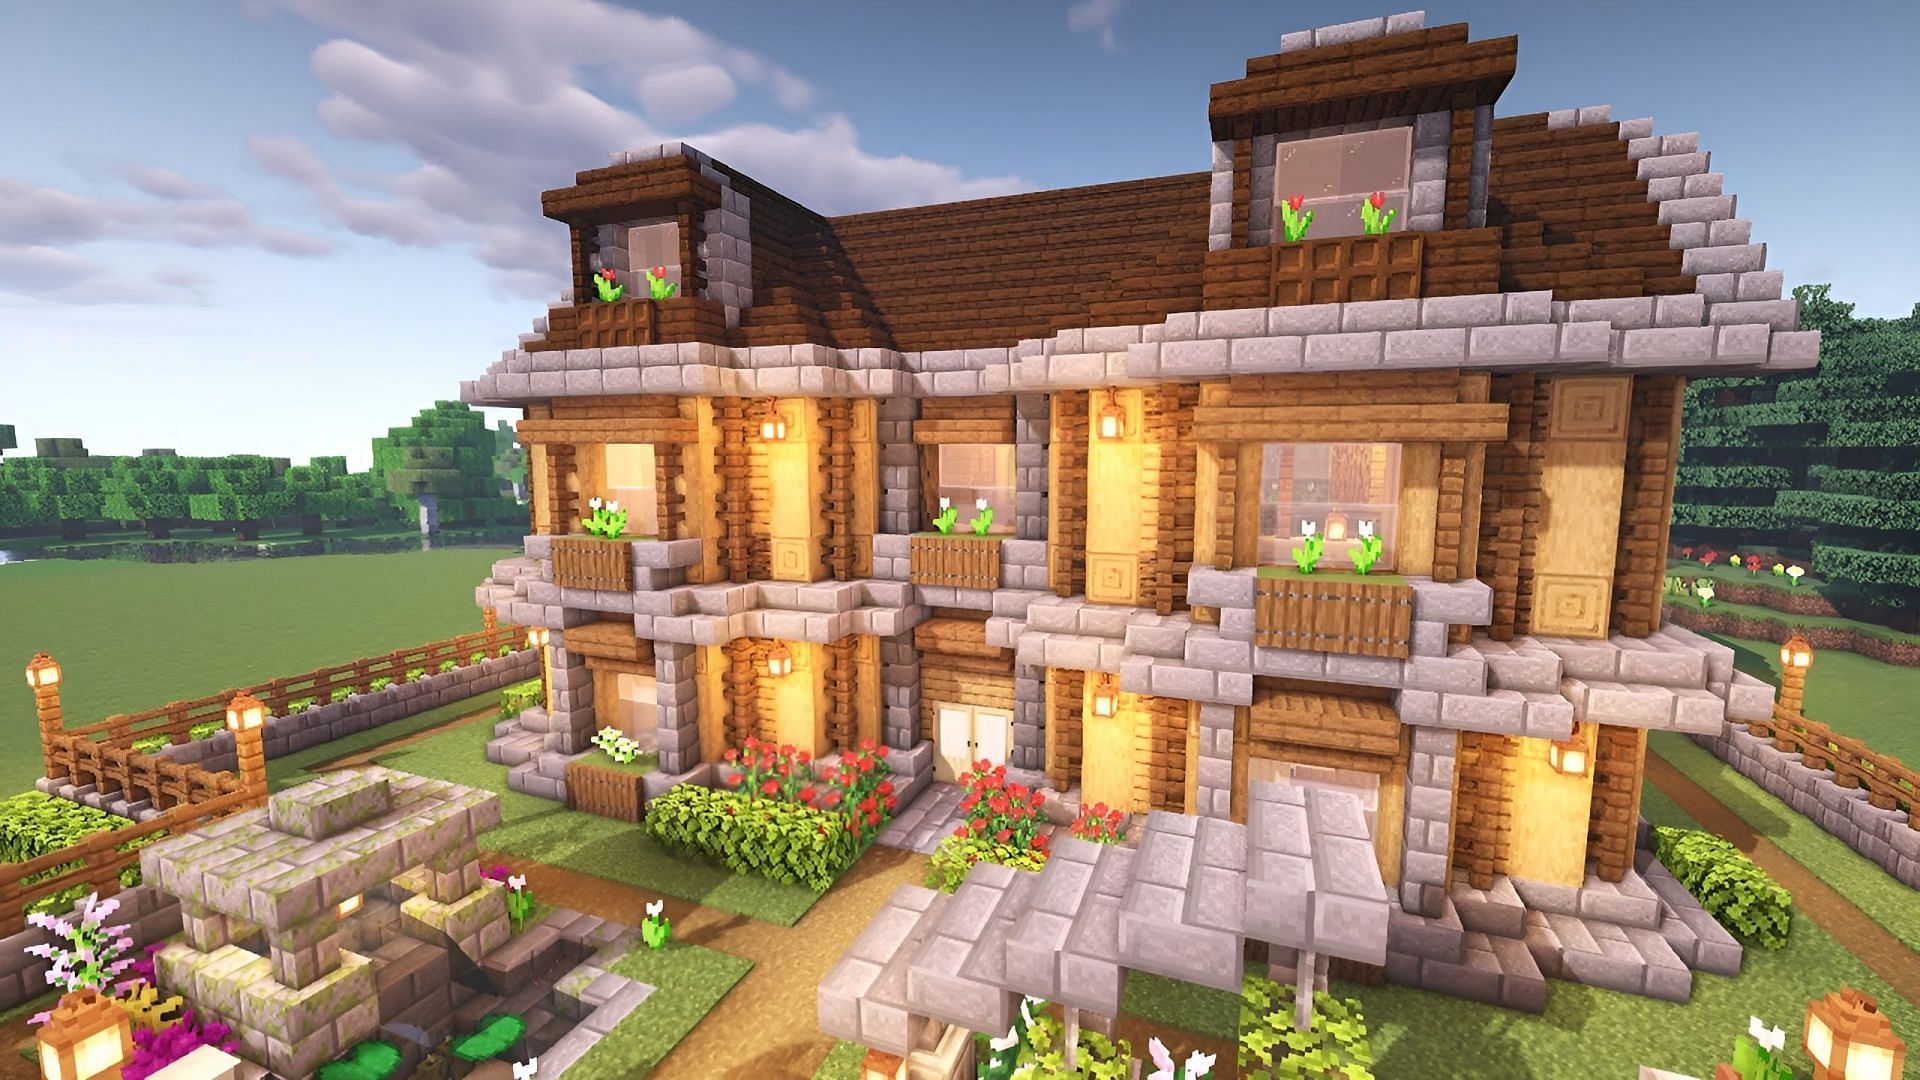 Minecraft large houses can make for remarkable builds (Image via Youtube/VexelVille)